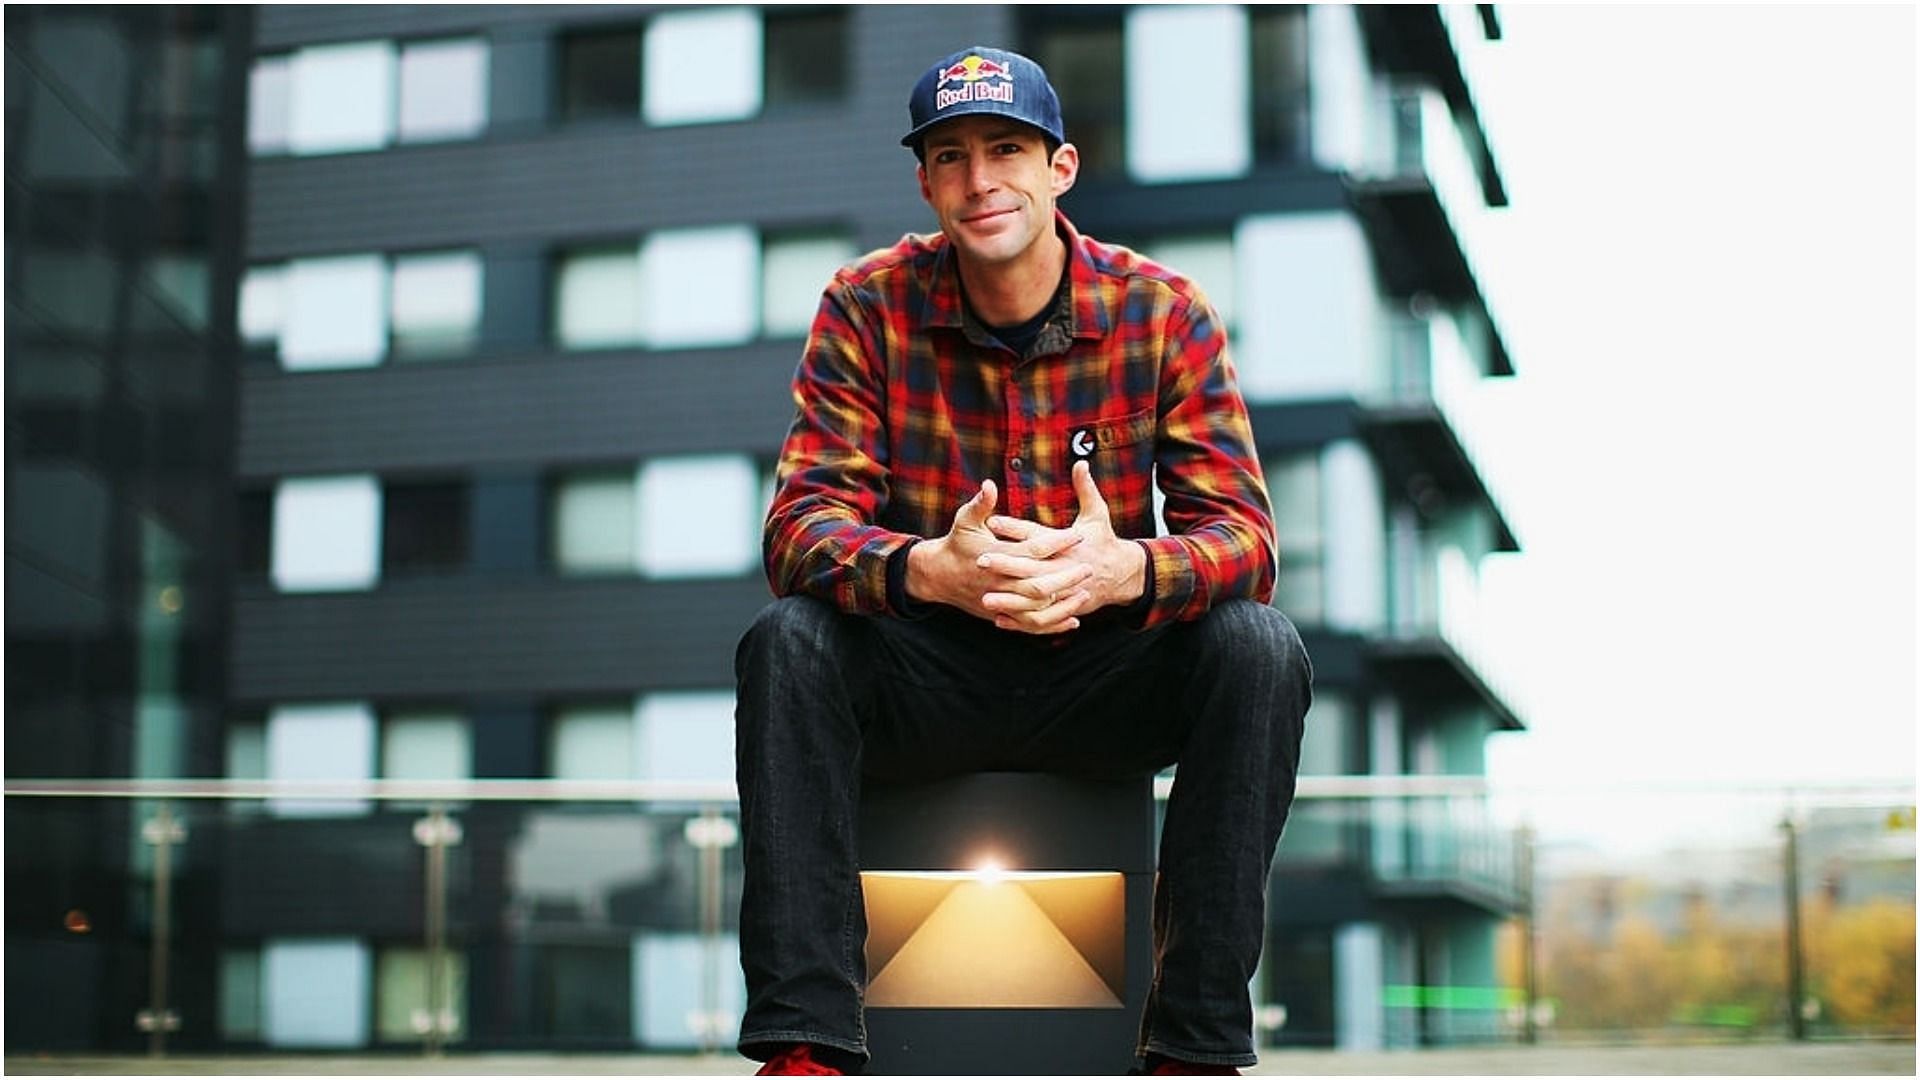 Travis Pastrana has performed several stunts throughout his career (Image via Bryn Lennon/Getty Images)